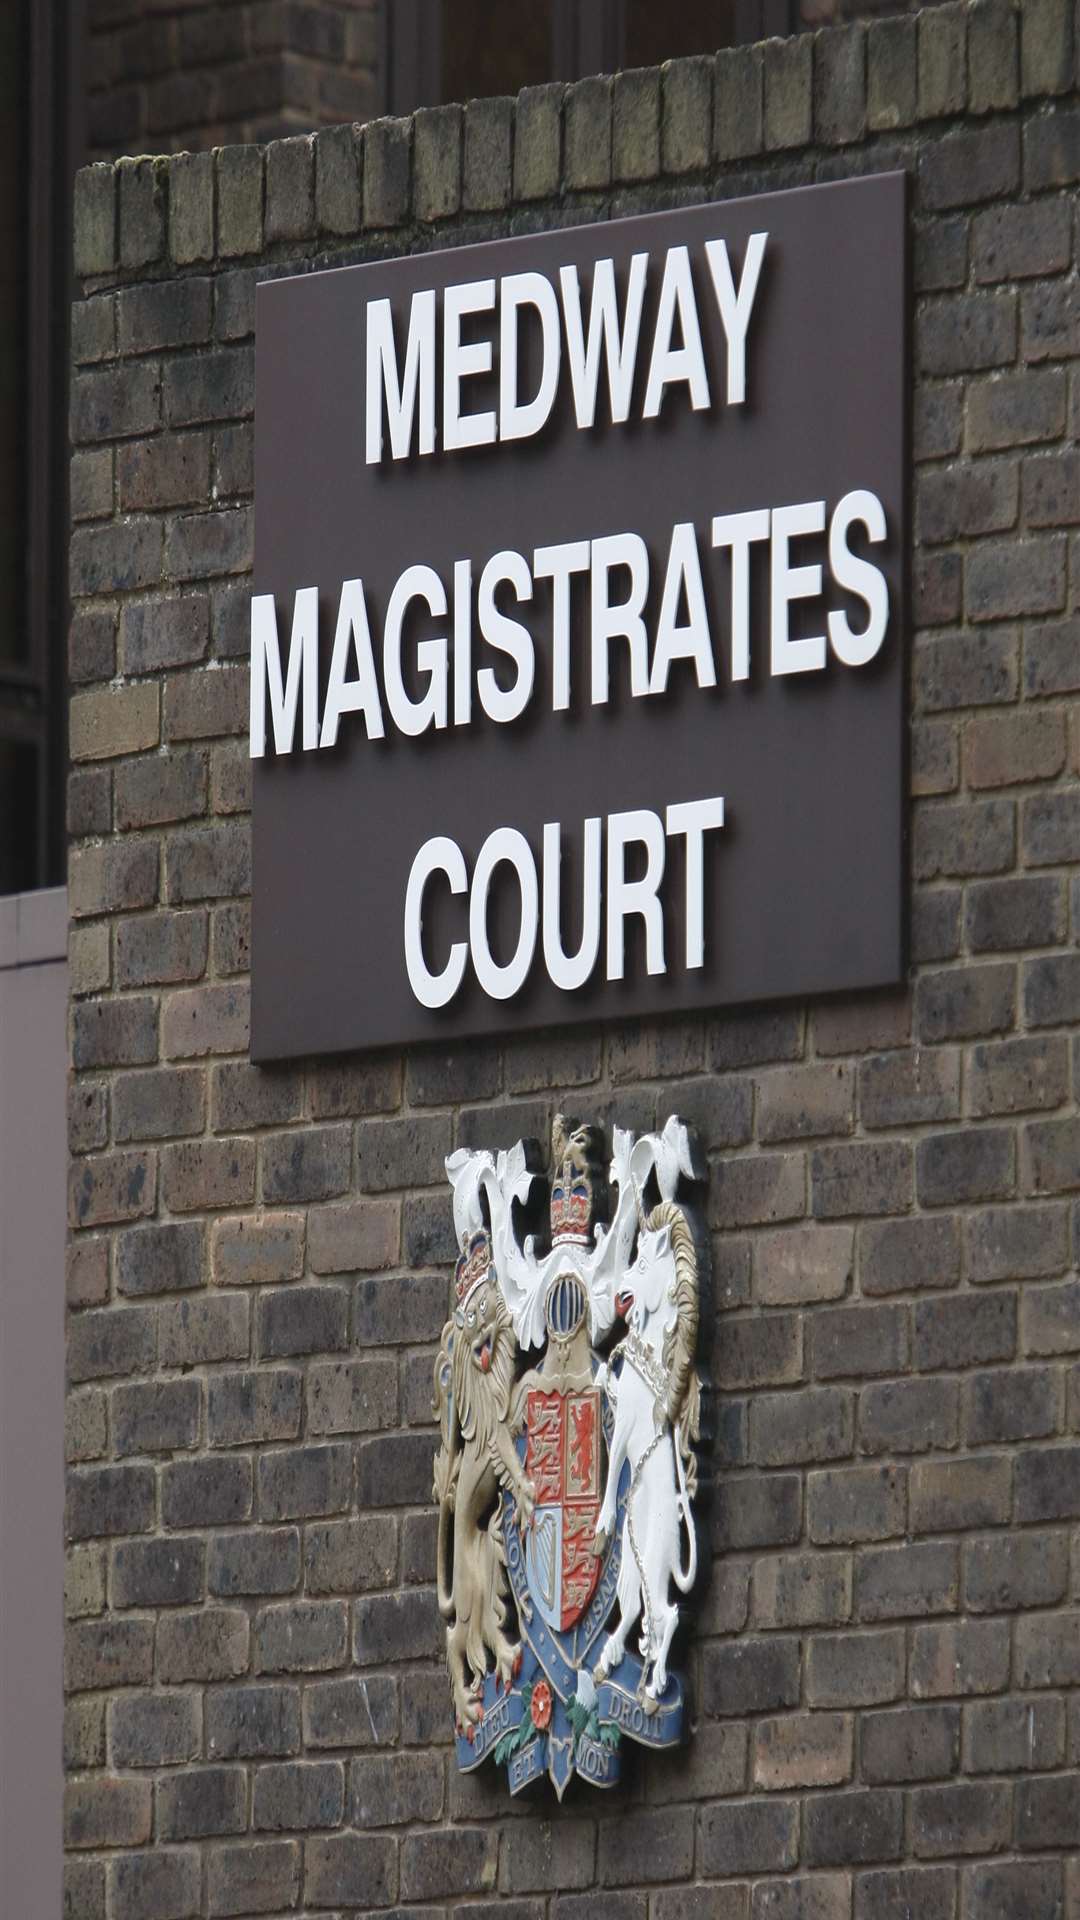 Medway Magistrates' Court